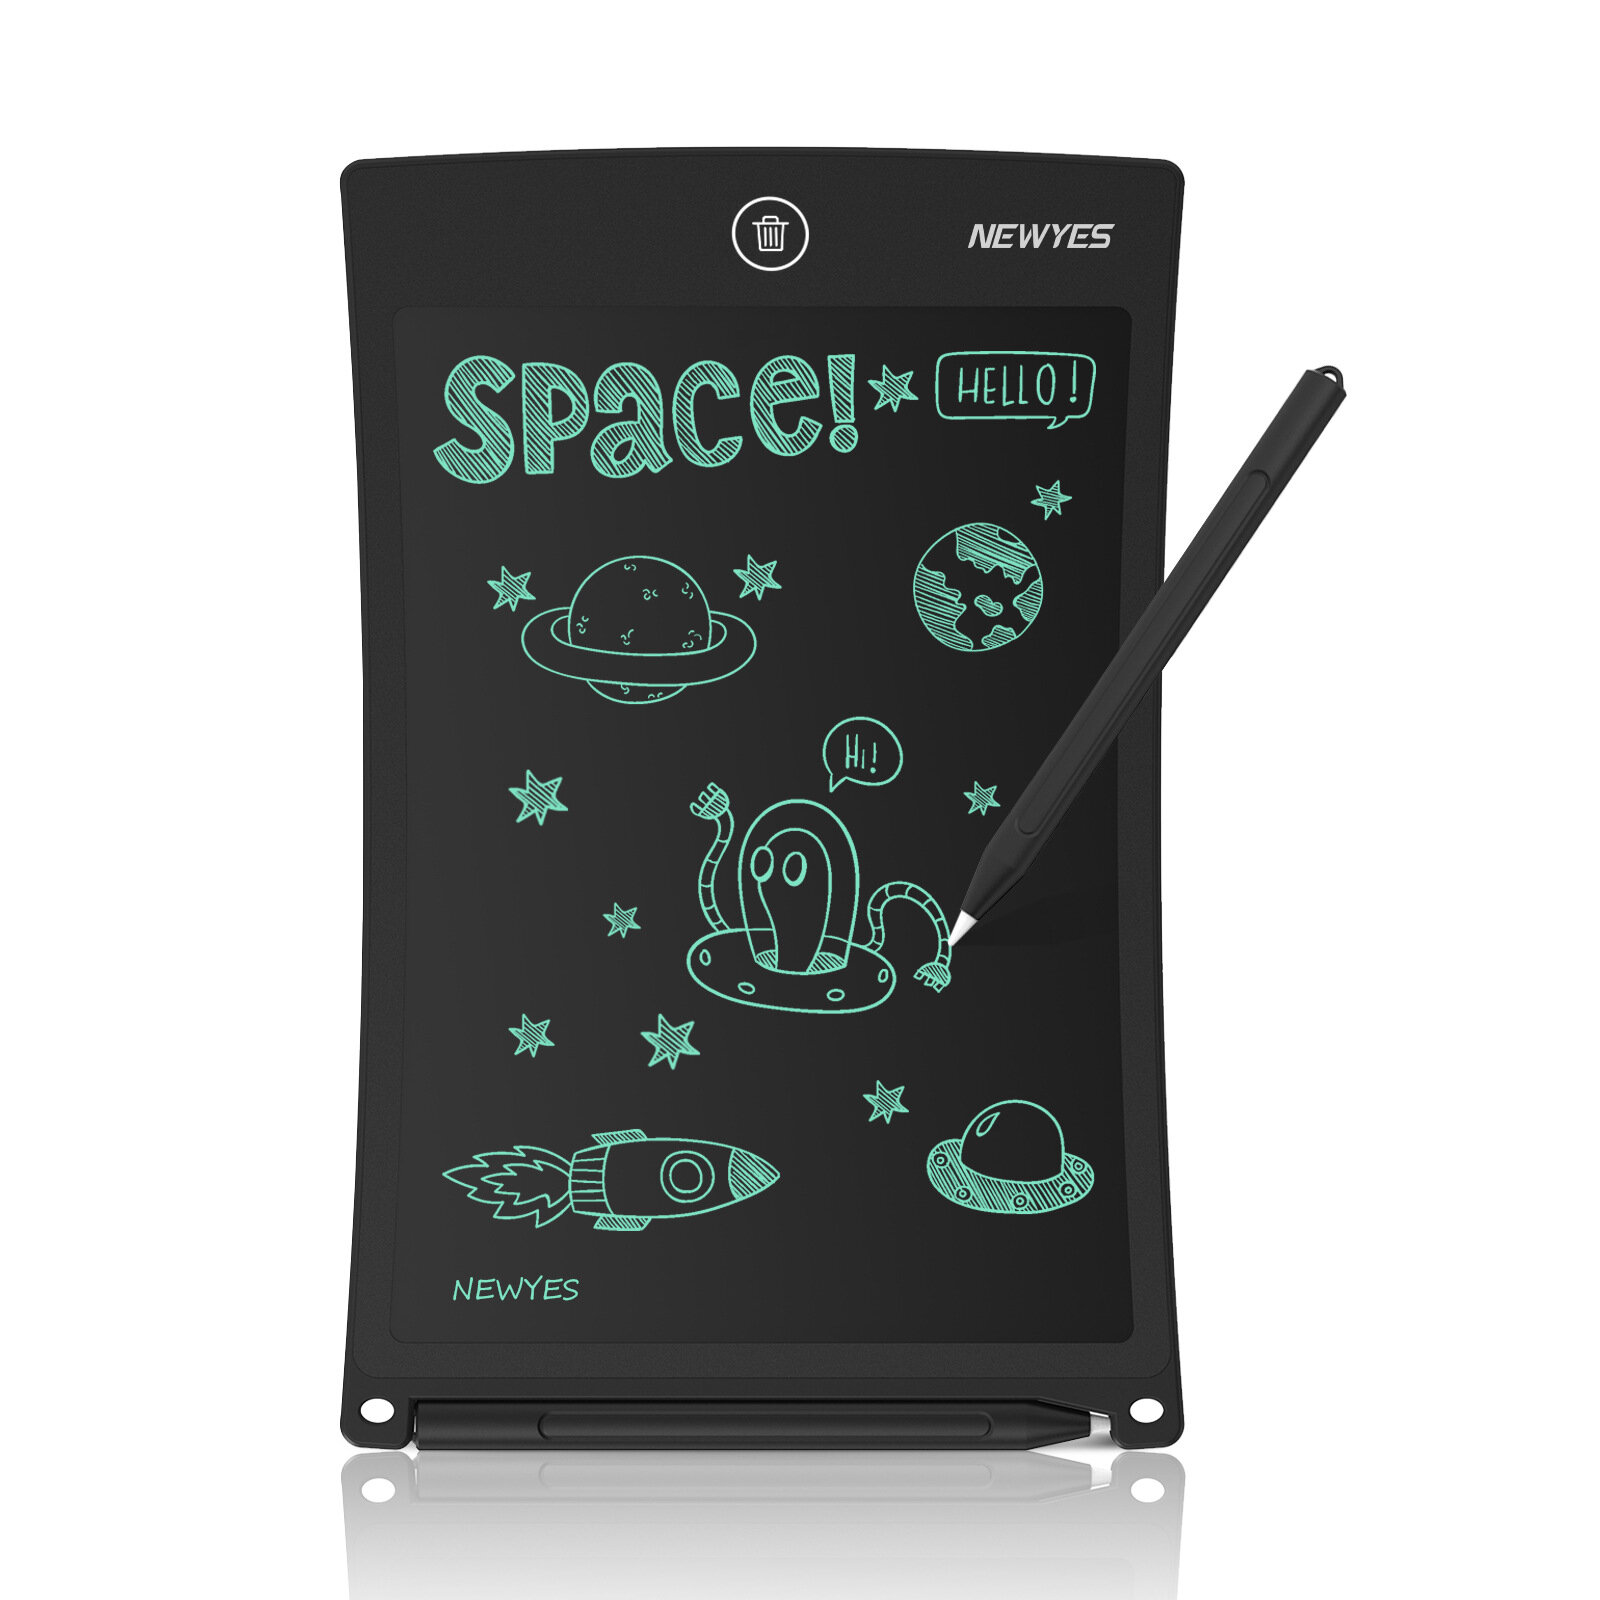 

NEWYES 8.5 Inch LCD Writing Tablet Magic Drawing Board Kids Art Electronic Painting Tool Boys Girls Children Educational